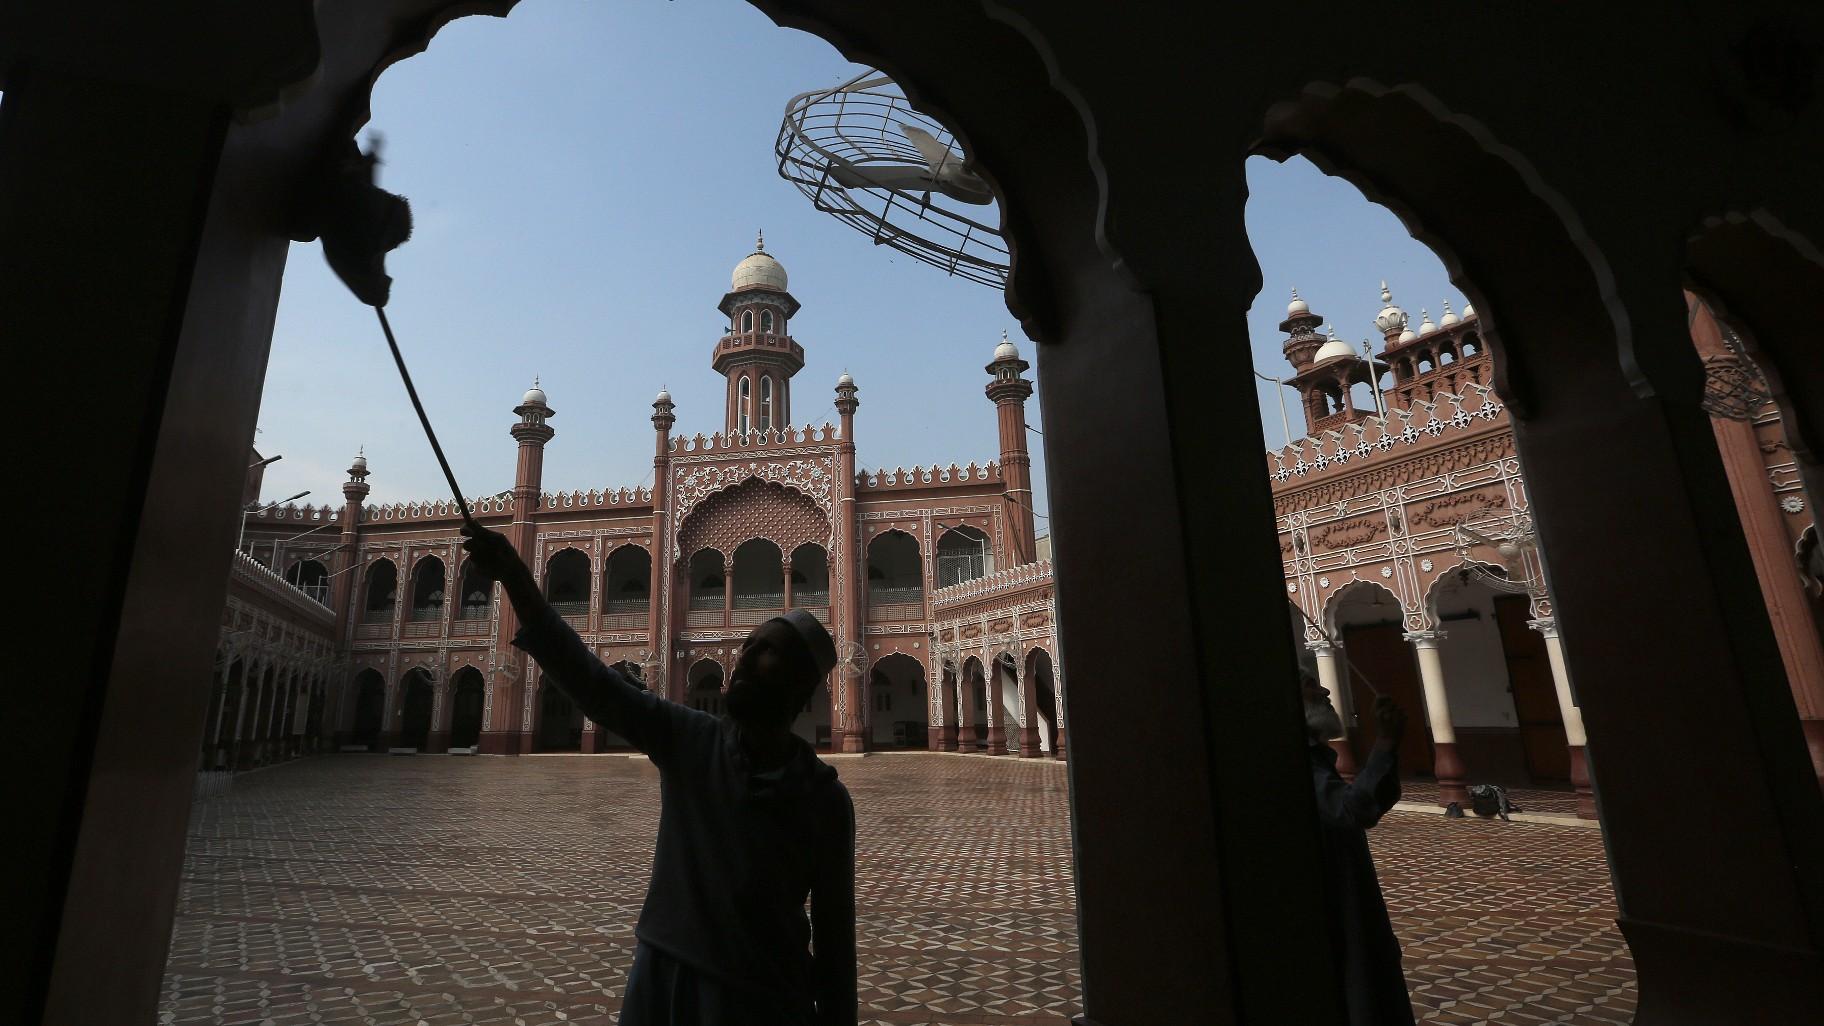 A worker cleans an area in the historical Sunehri mosque, ahead of the upcoming Muslim fasting month of Ramadan, in Peshawar, Pakistan, Wednesday, March 22, 2023. (AP Photo / Muhammad Sajjad)